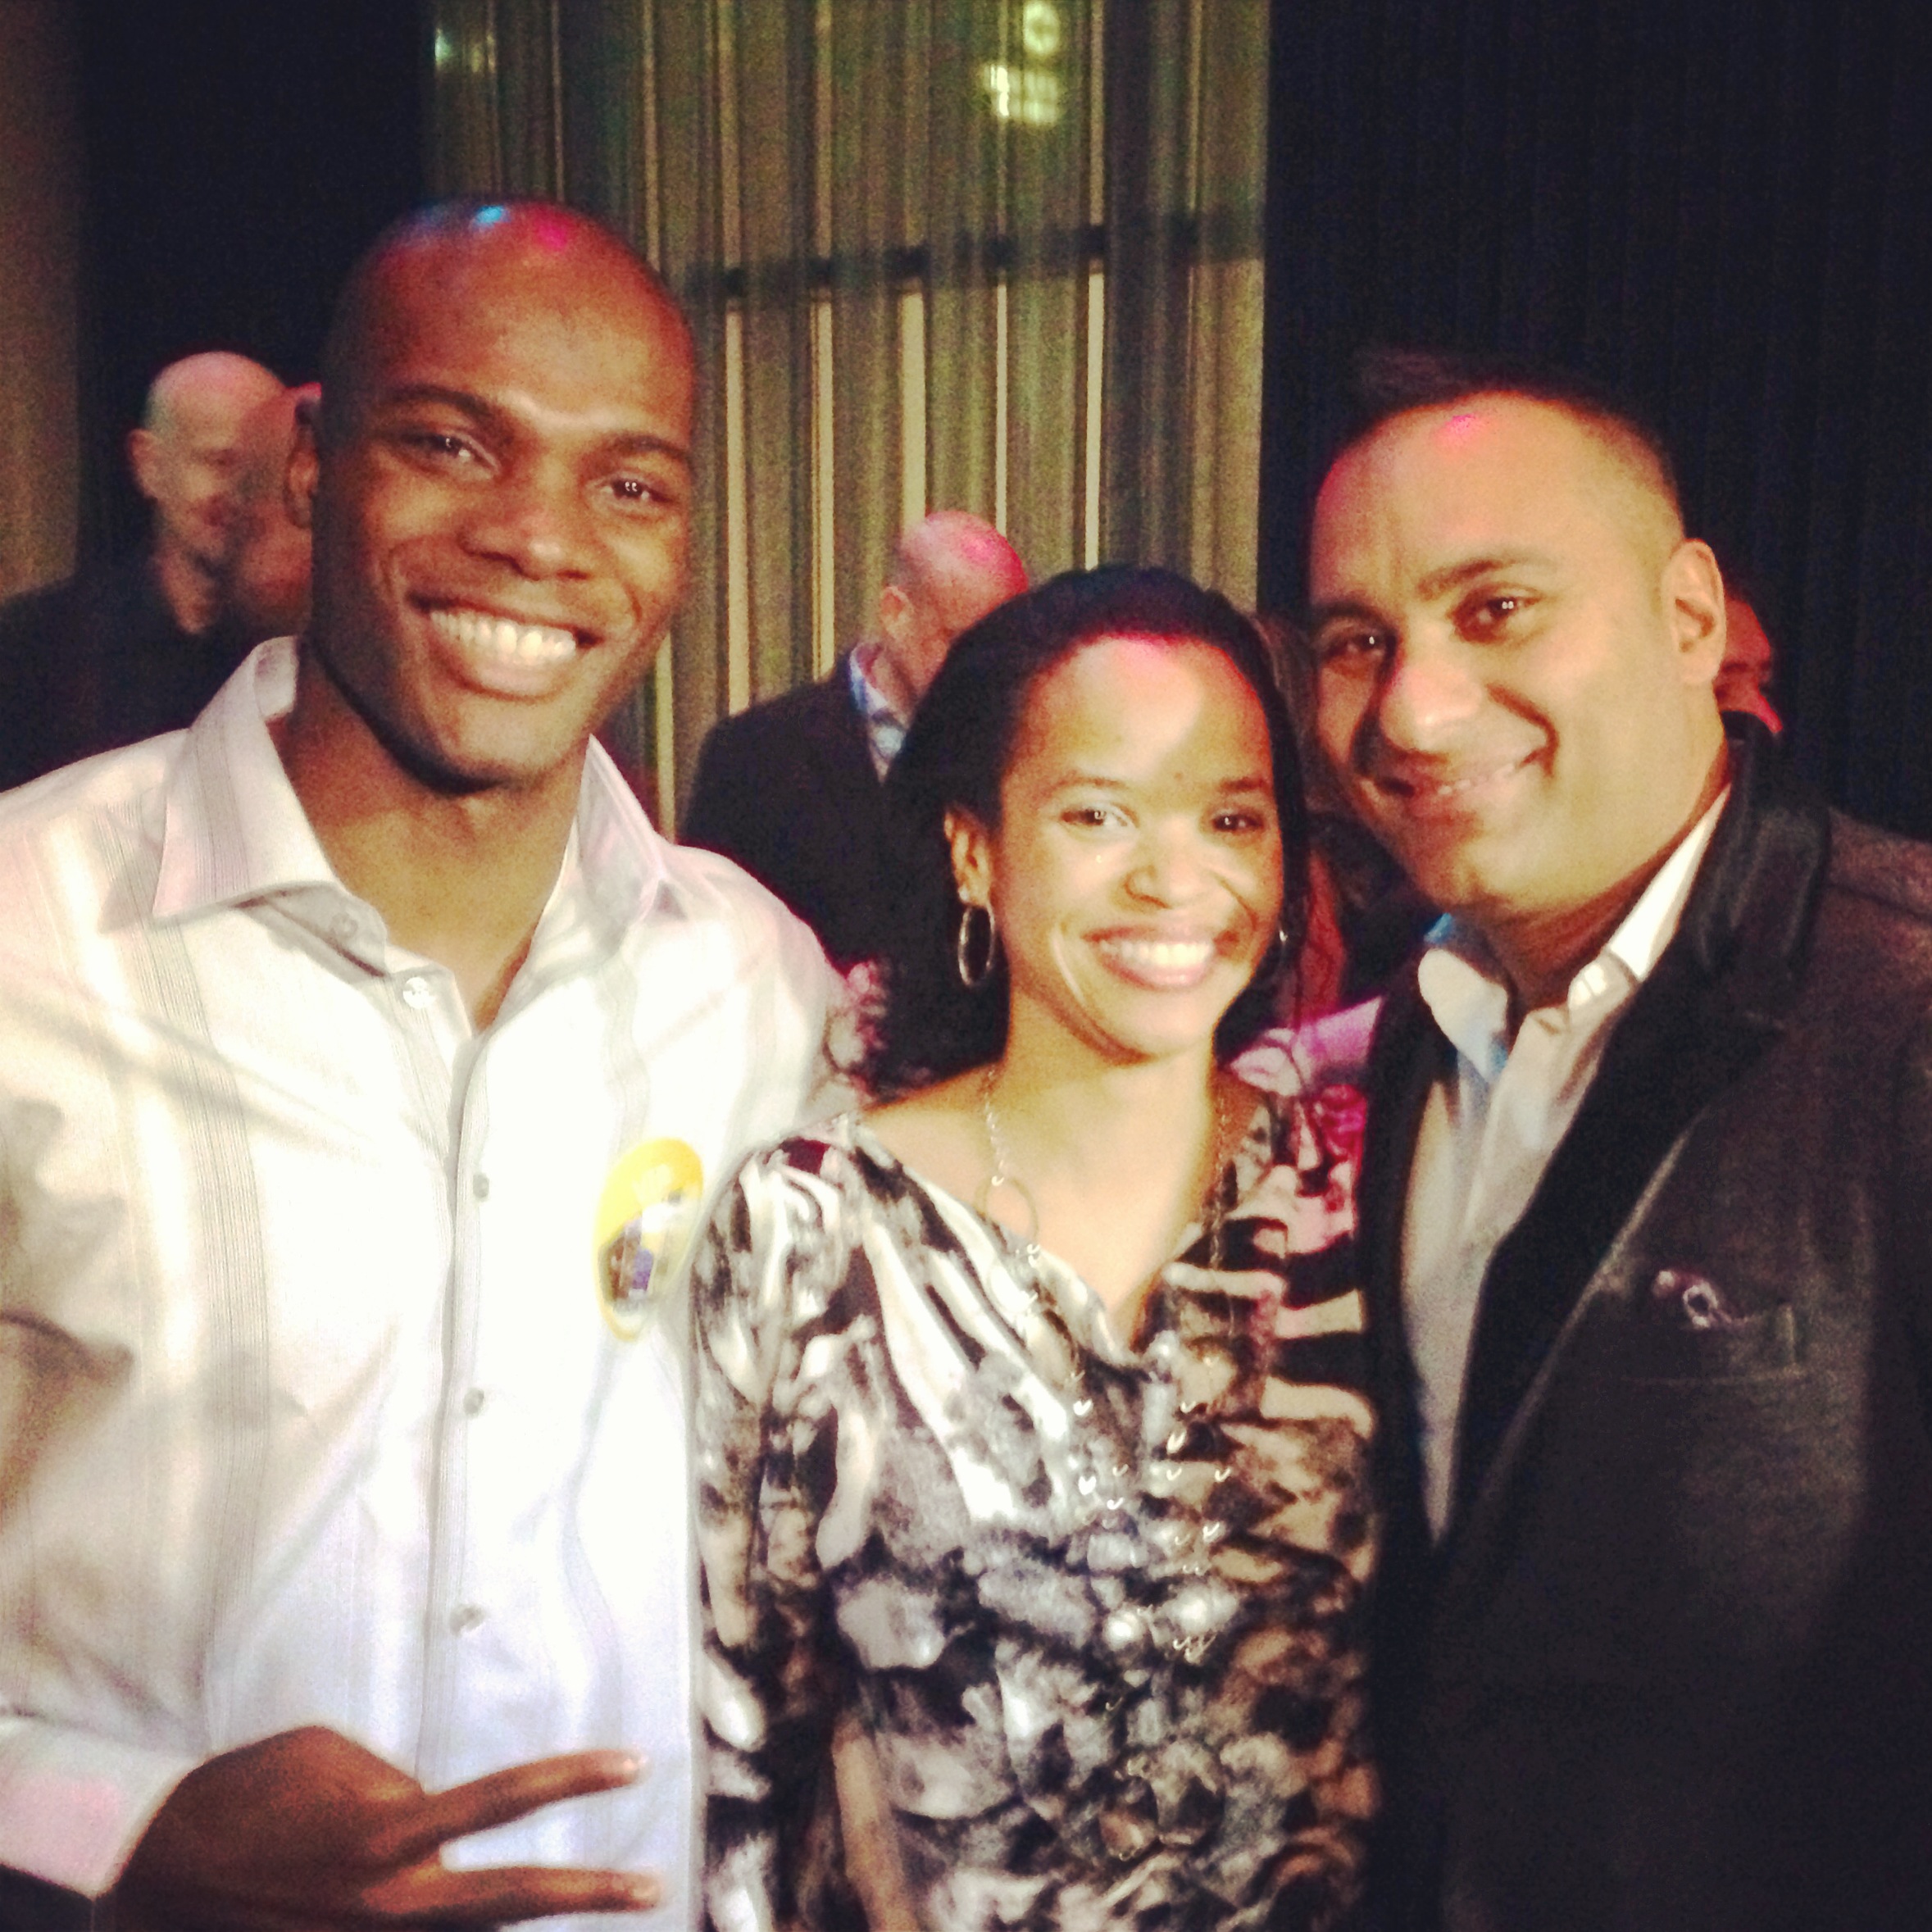 Russell Peters, the wife, and I.